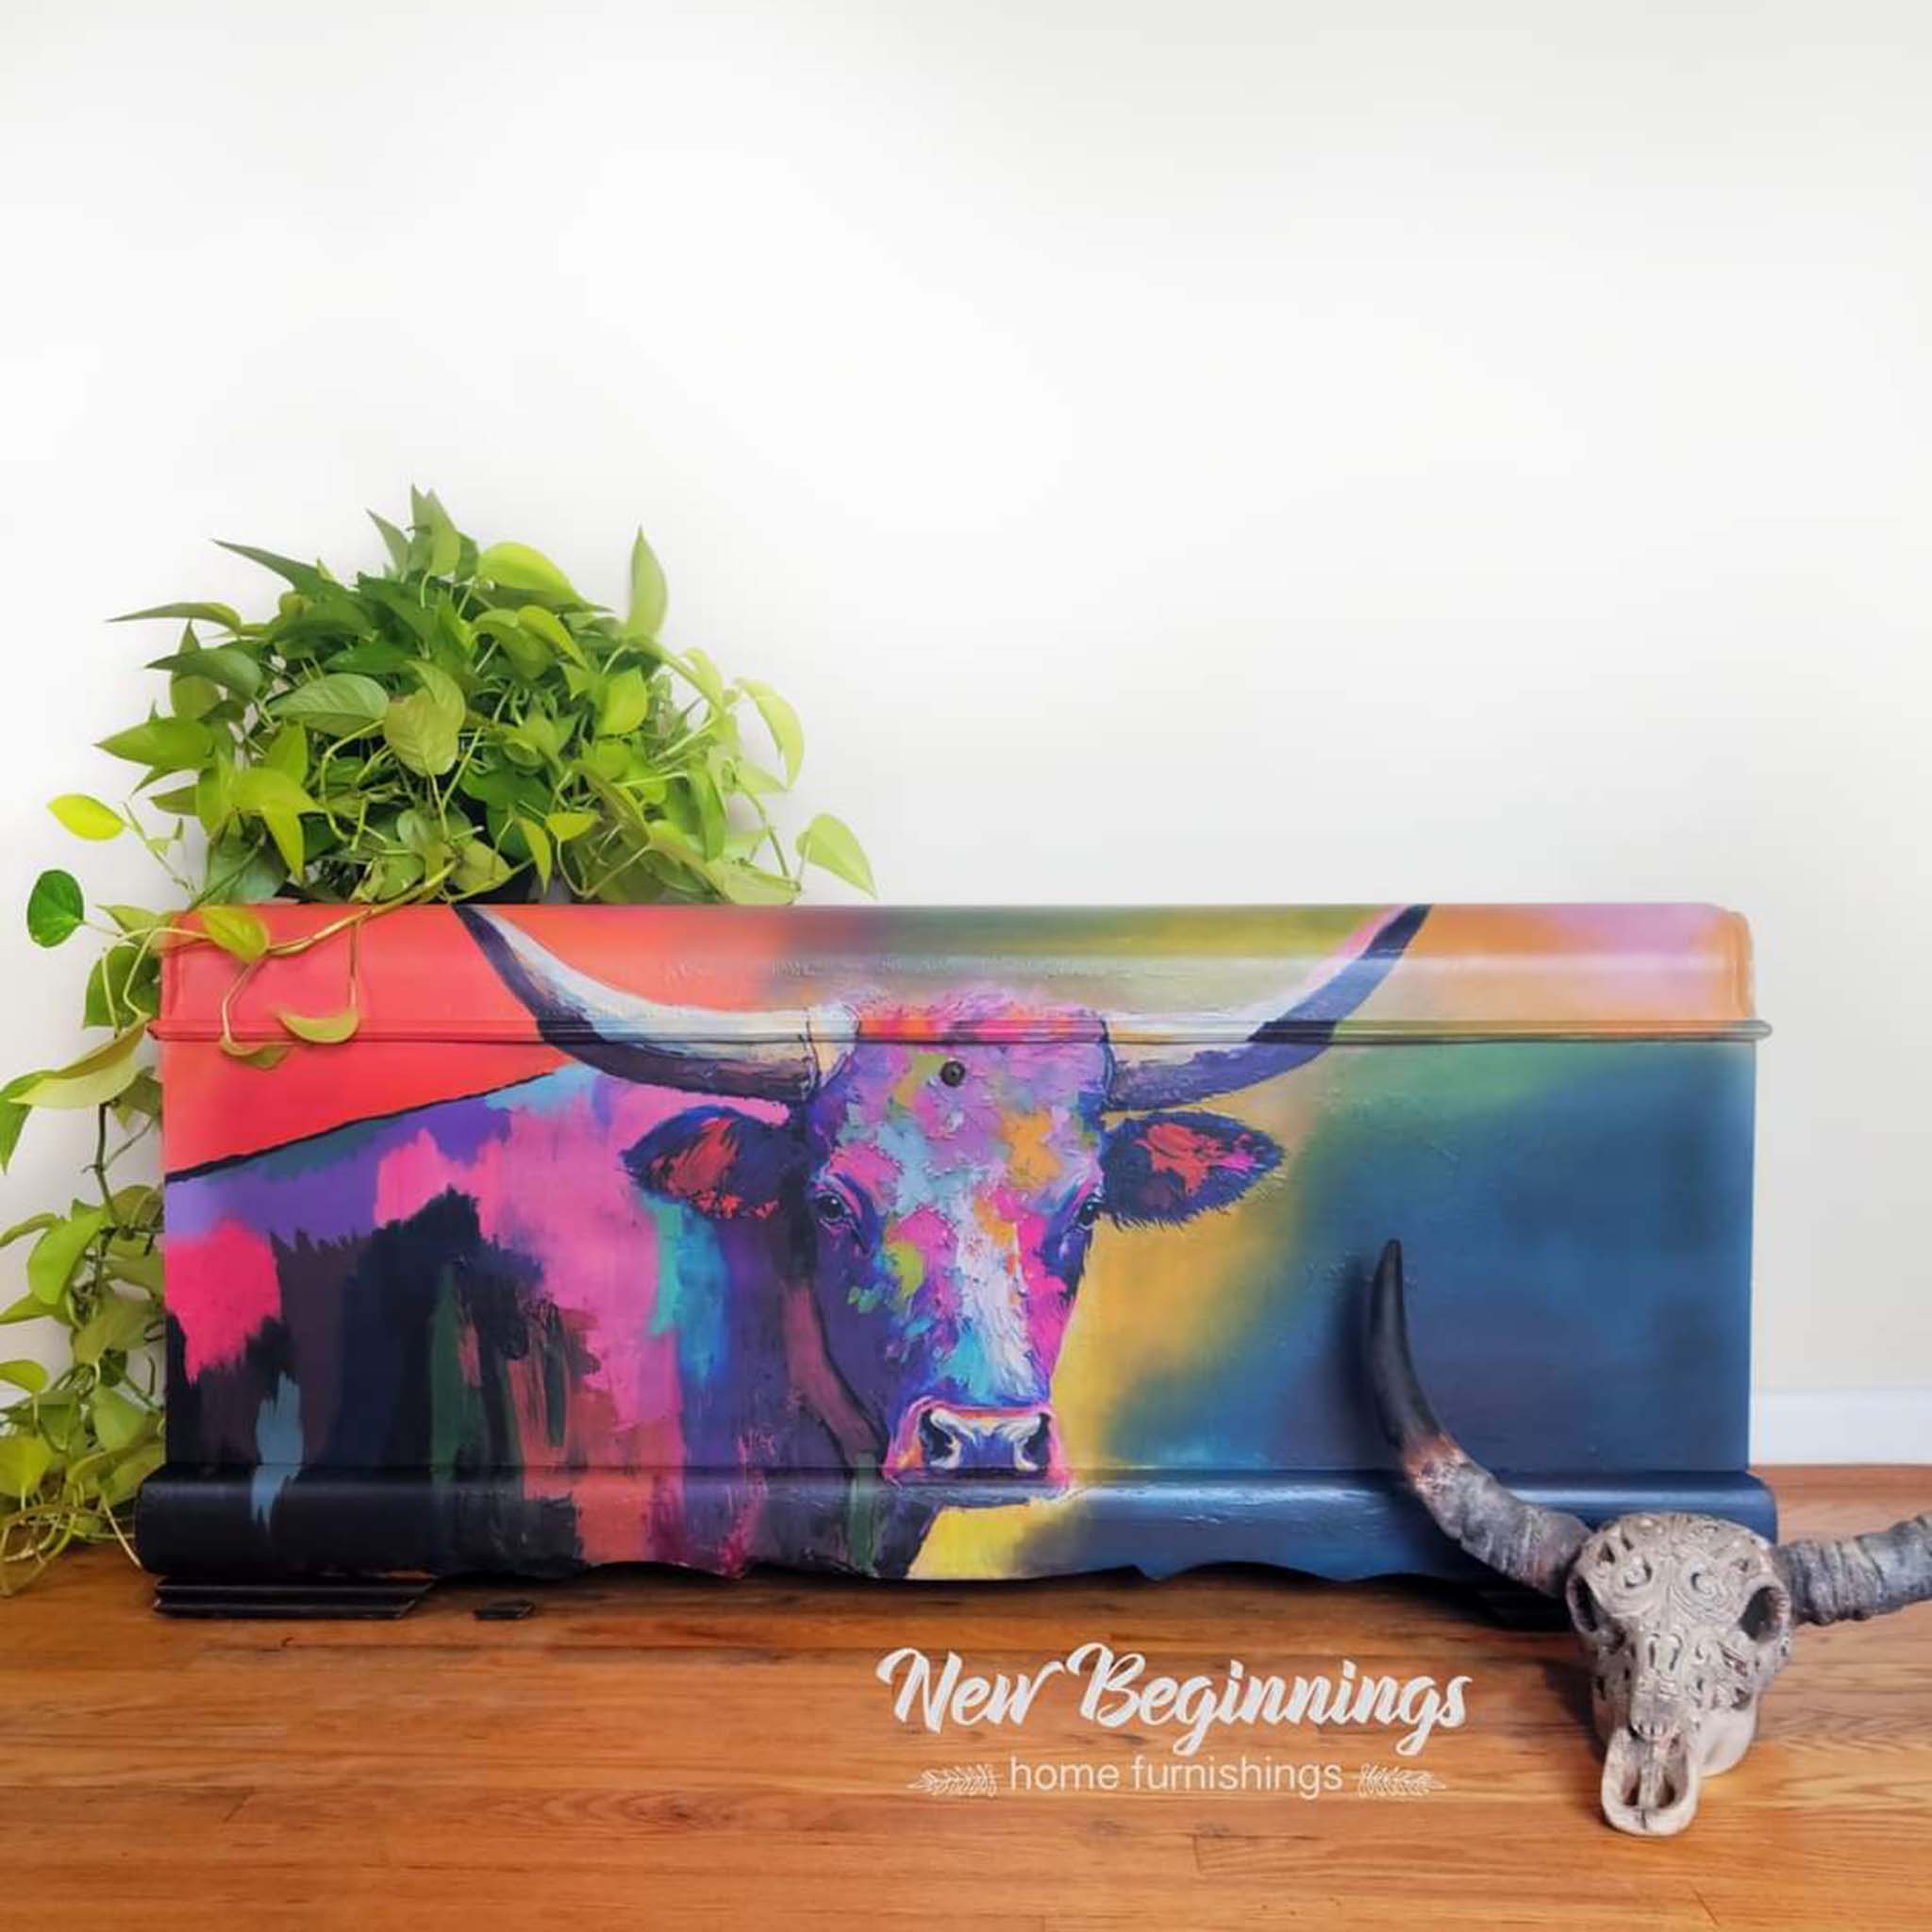 A storage chest refurbished by New Beginnings Home Furnishings features Whimsykel's Dottie Longhorn tissue paper covering it.